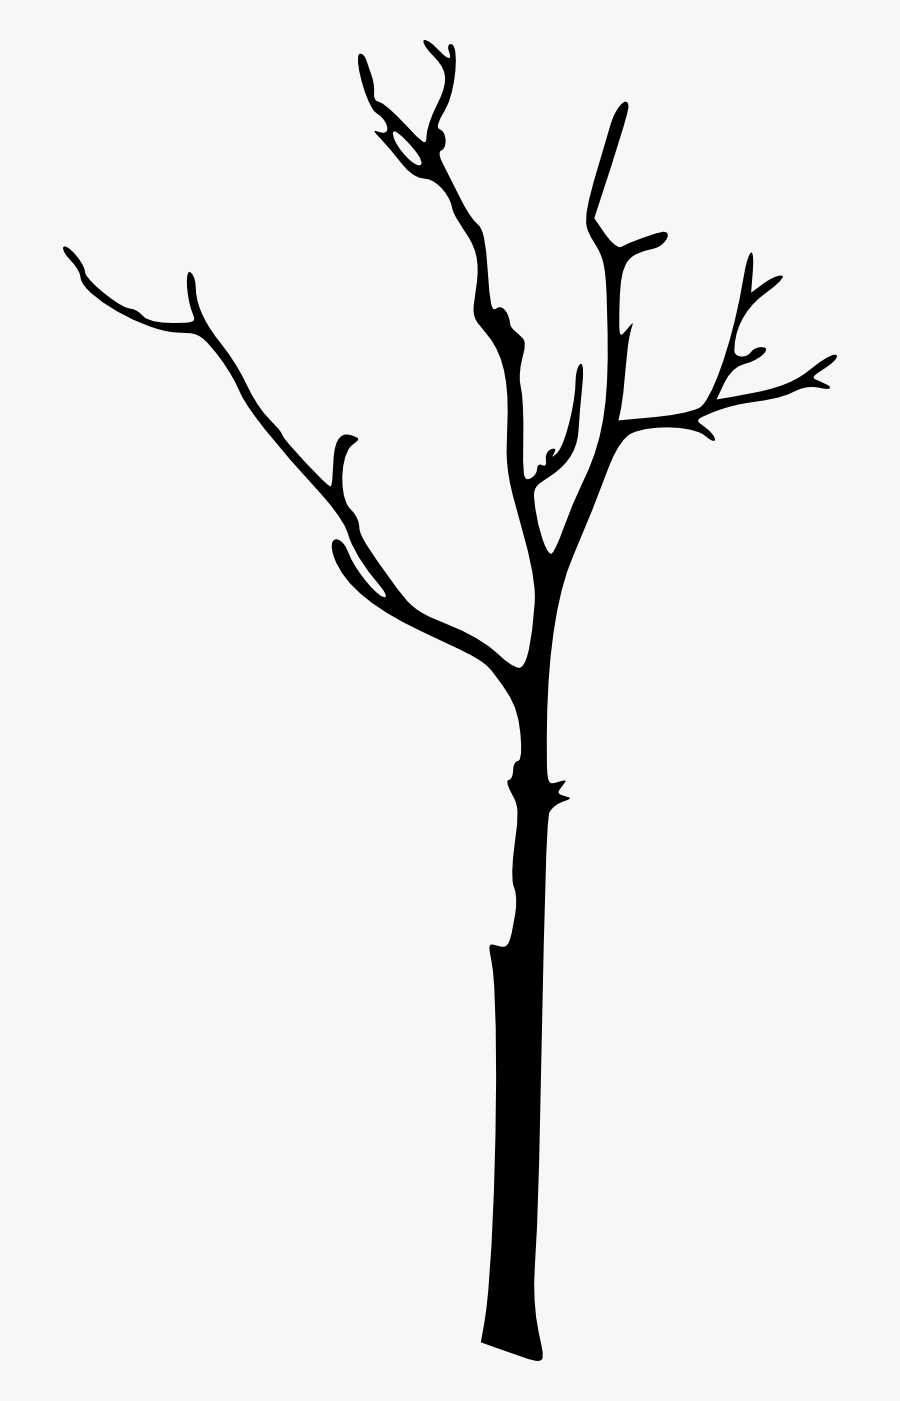 Silhouette Twig Clip Art - Tree Trunk Silhouette Png, Transparent Clipart